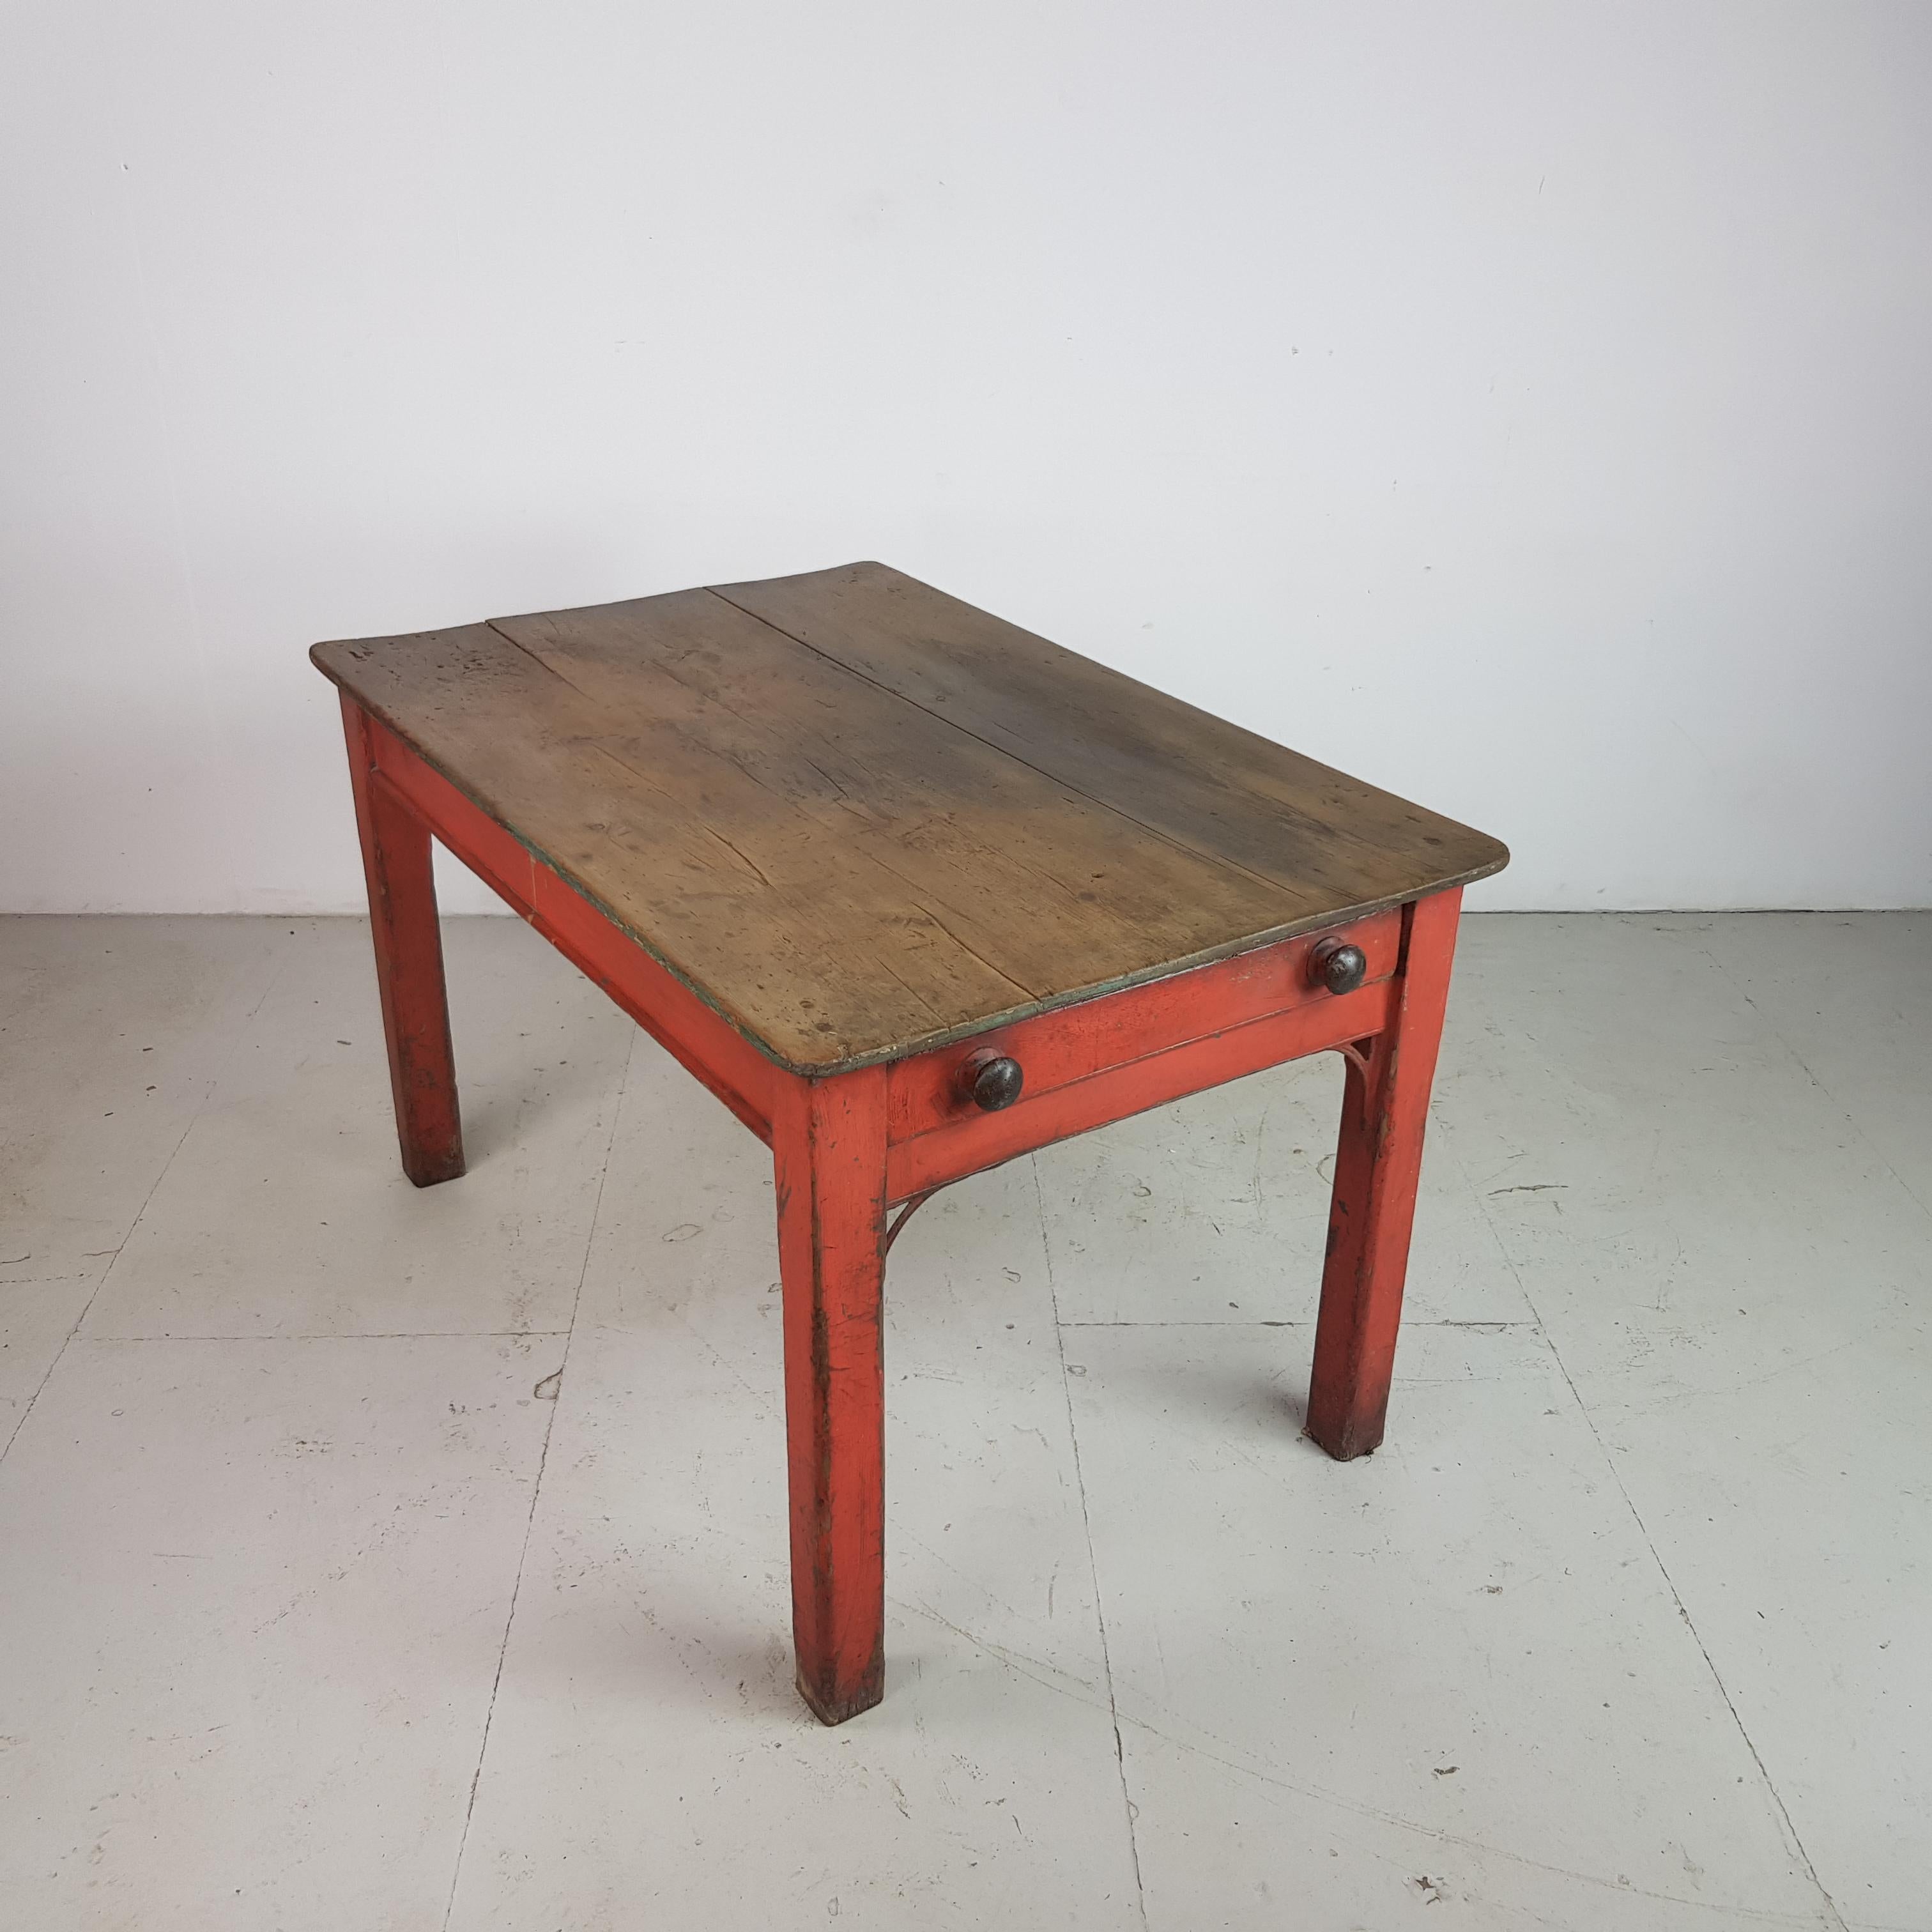 Gorgeous pine prep / kitchen table from the first part of the last century in its original naturally distressed painted finish giving it a lovely rustic look. With 1 drawer including original handles.

In good vintage condition, signs of wear and